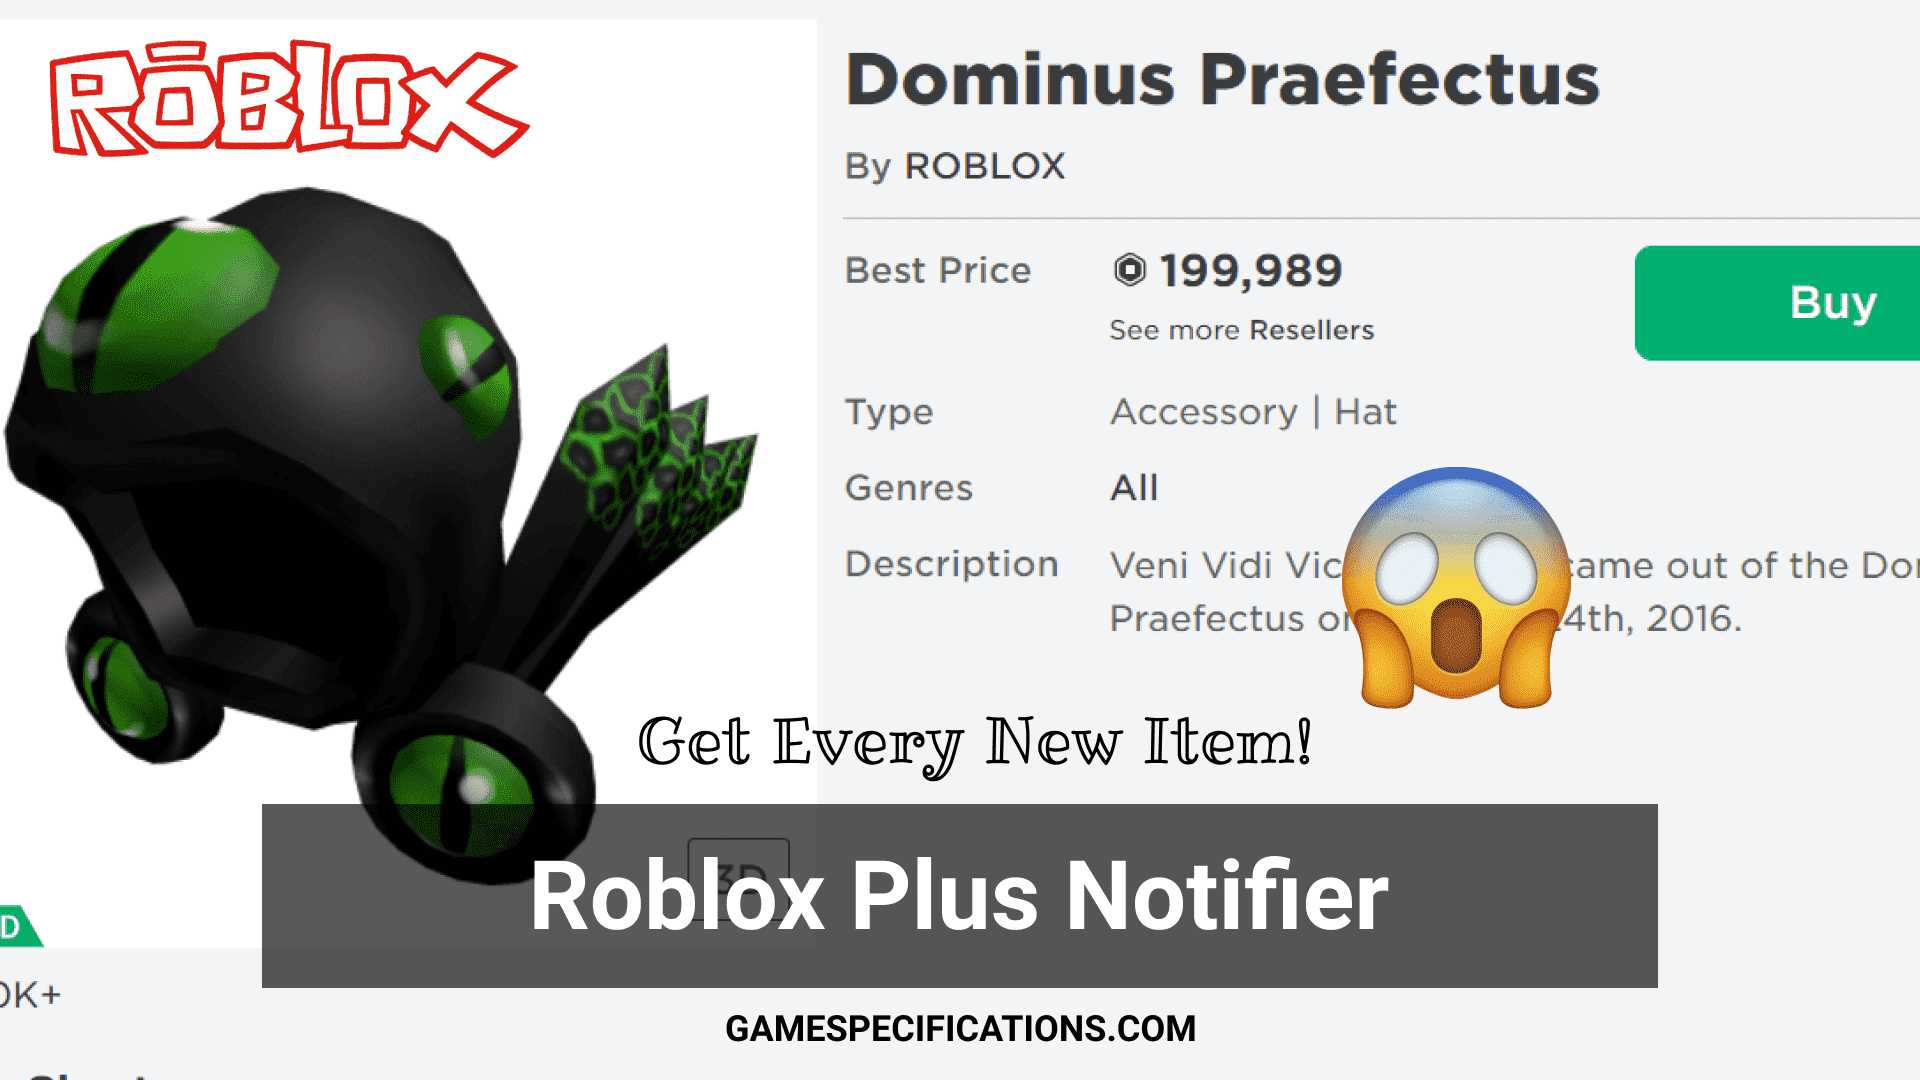 How To Use Roblox Plus Notifier To Get The Catalogue Items First 2021 Game Specifications - how to resell items on roblox